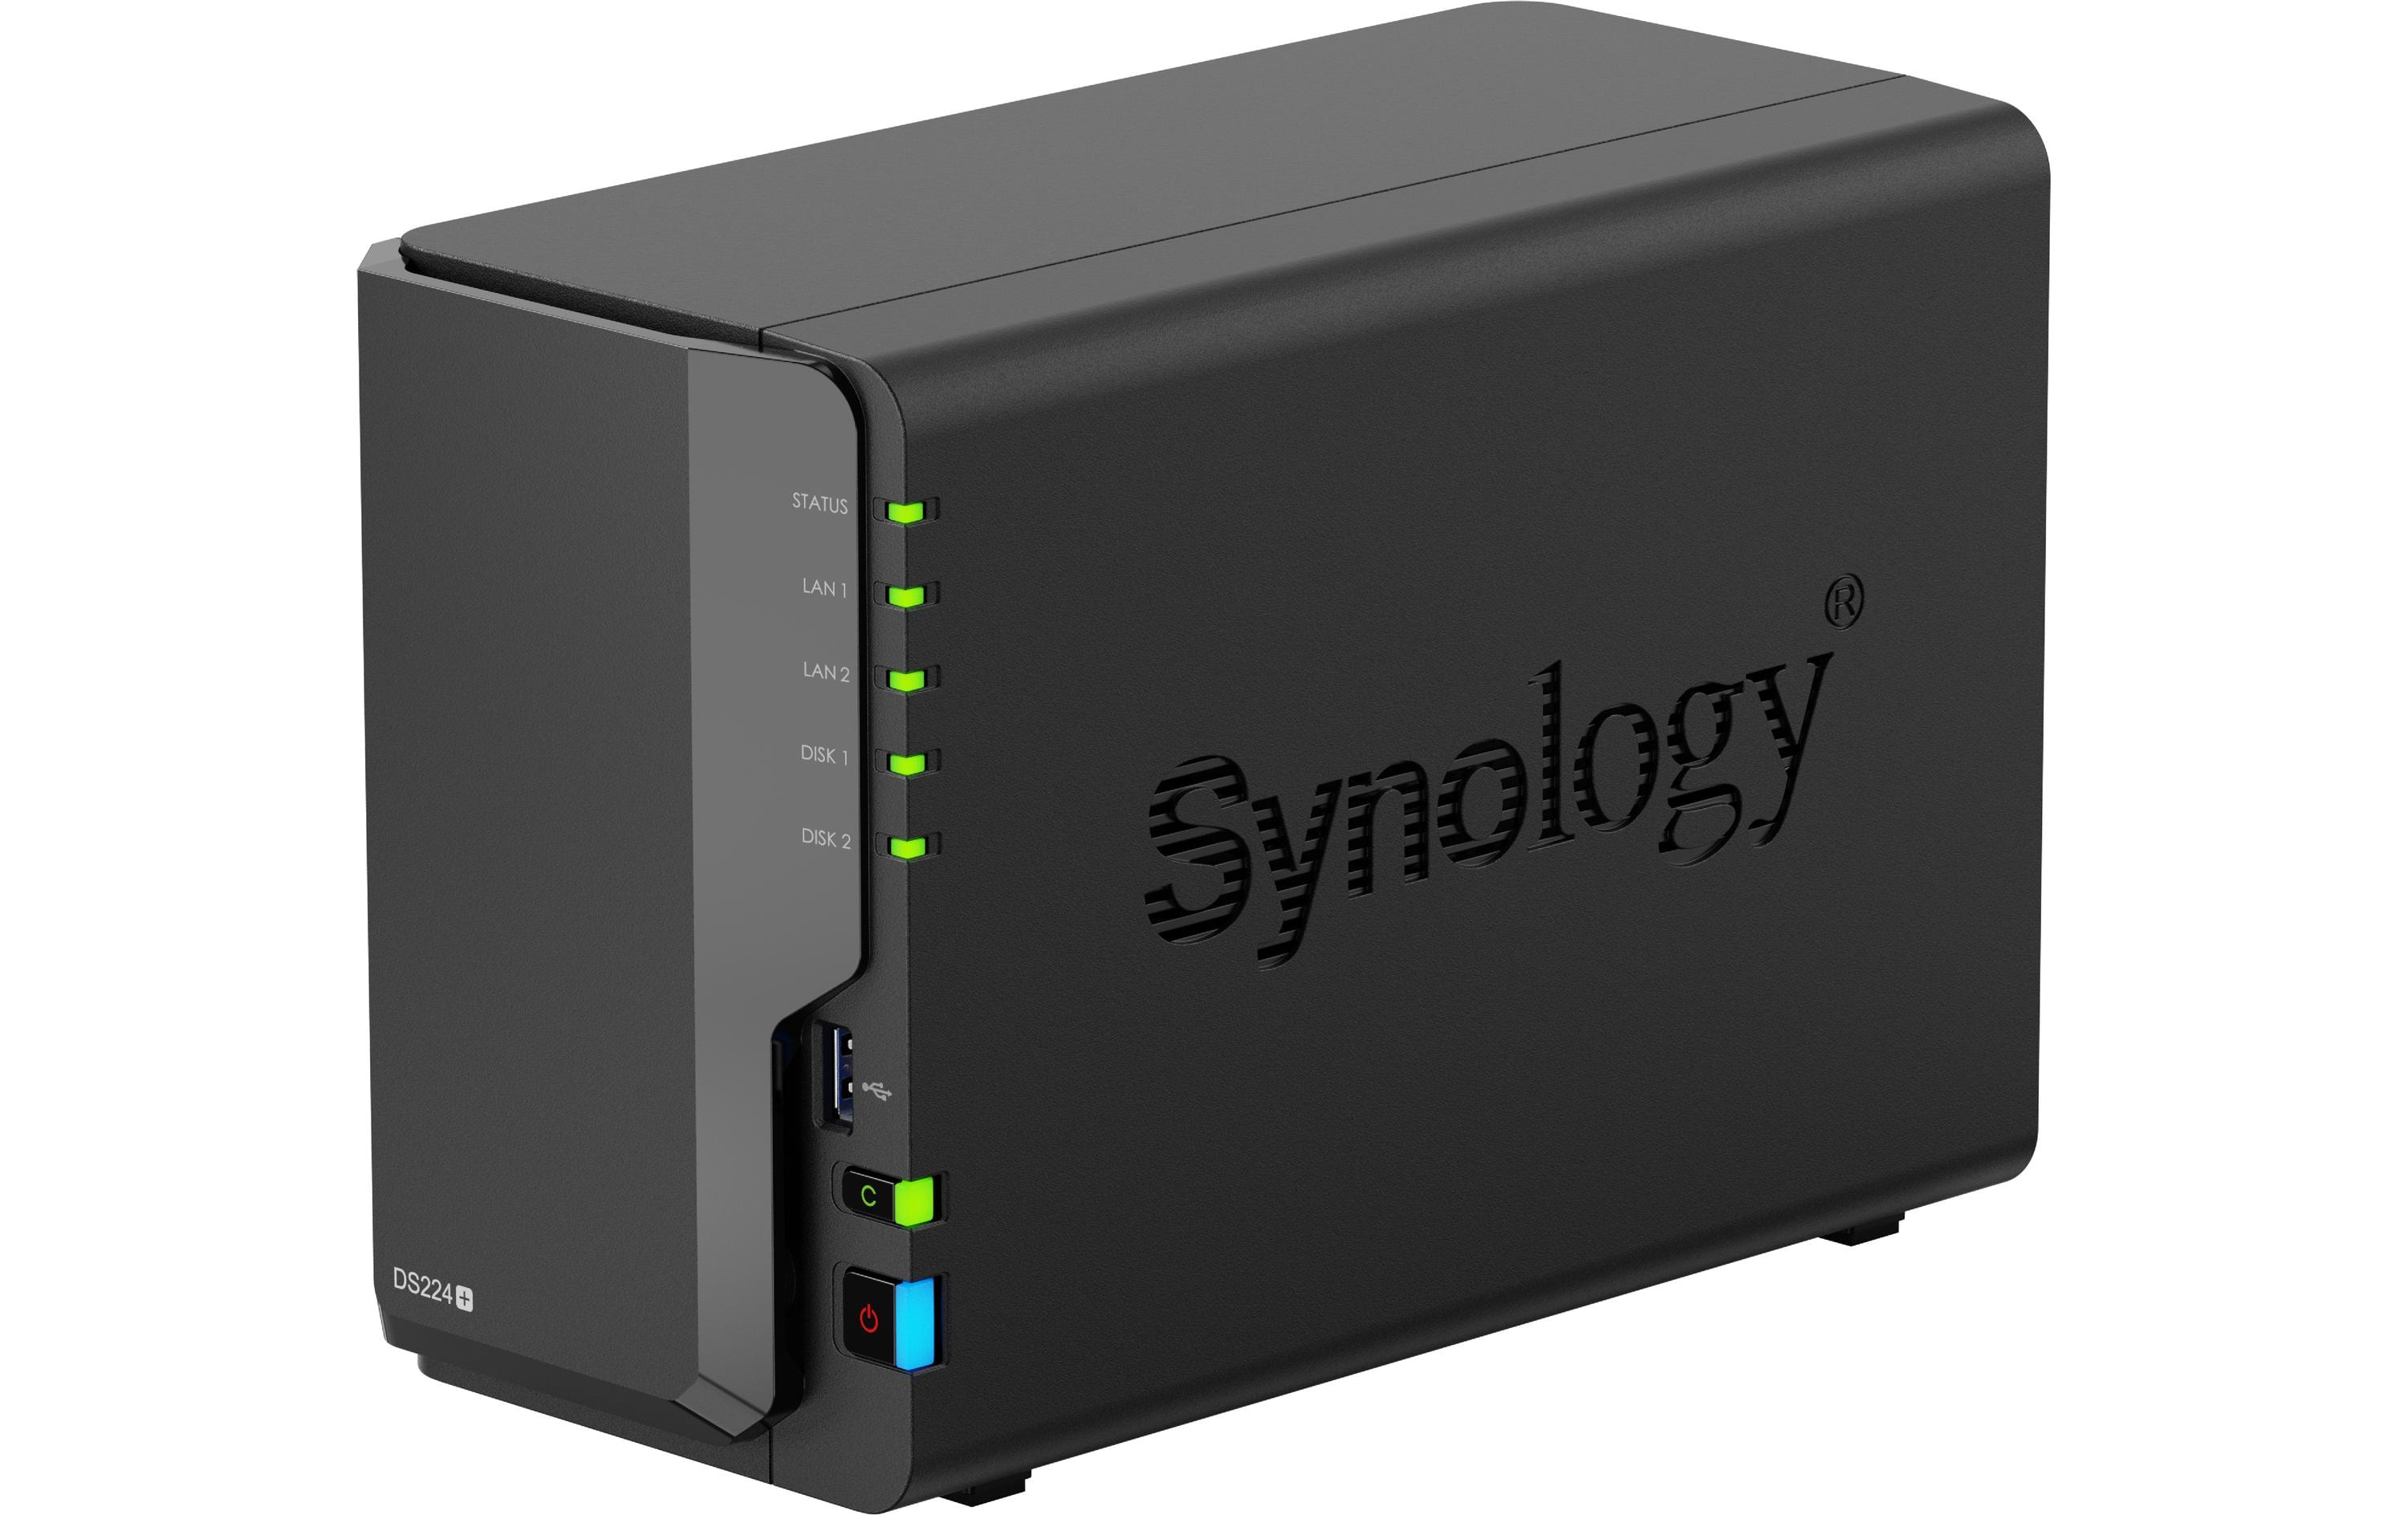 Synology NAS DiskStation DS224+ 2-bay Seagate Ironwolf 8 TB